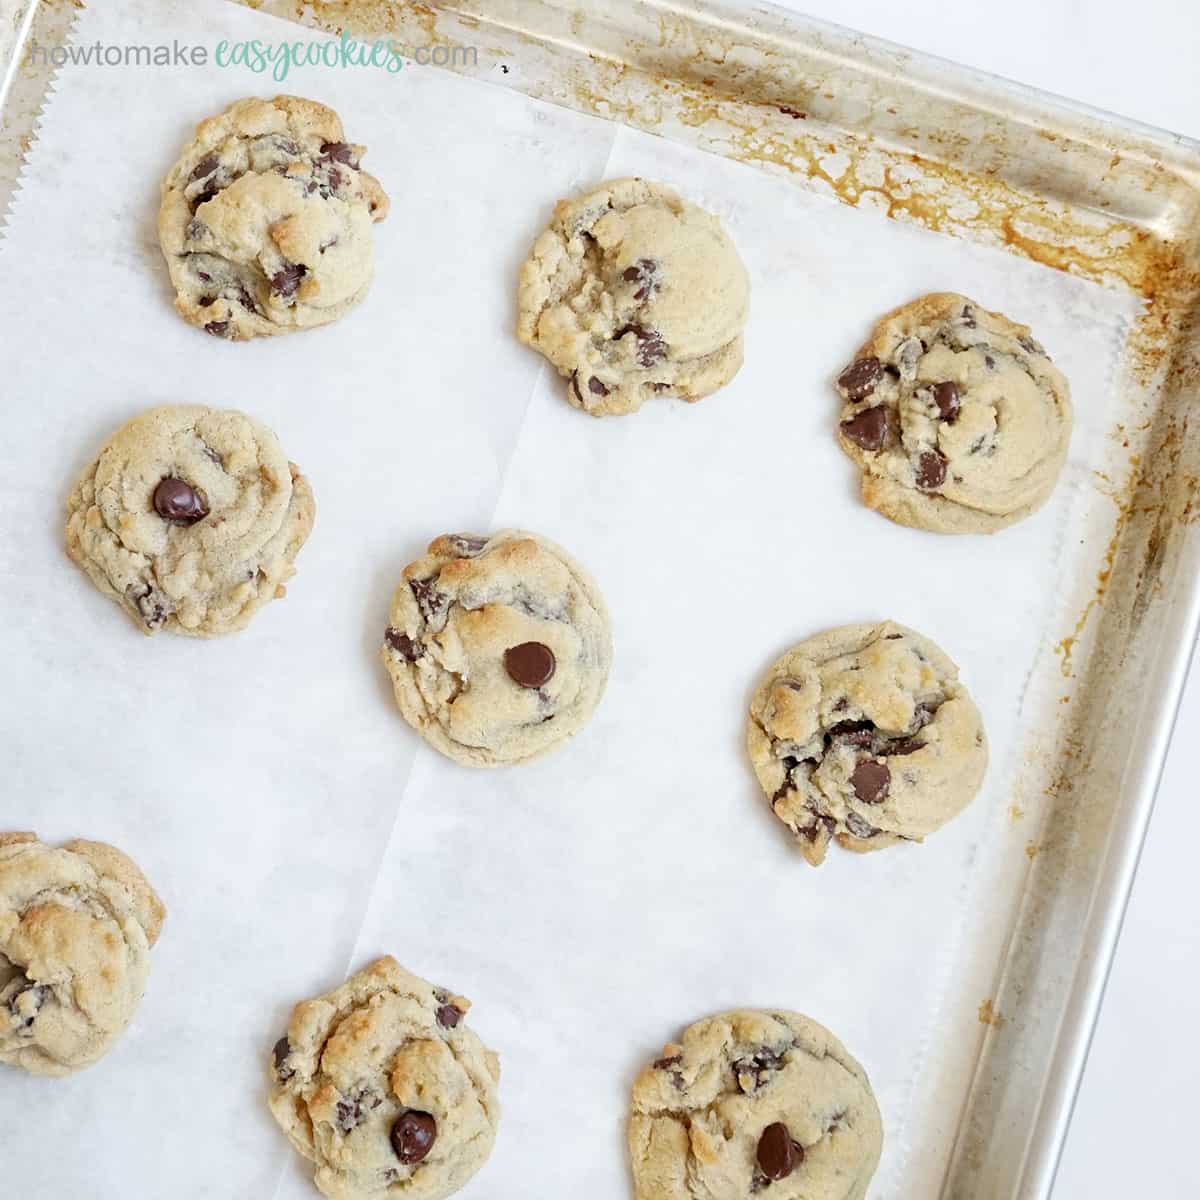 eggless chocolate chip cookies on baking tray